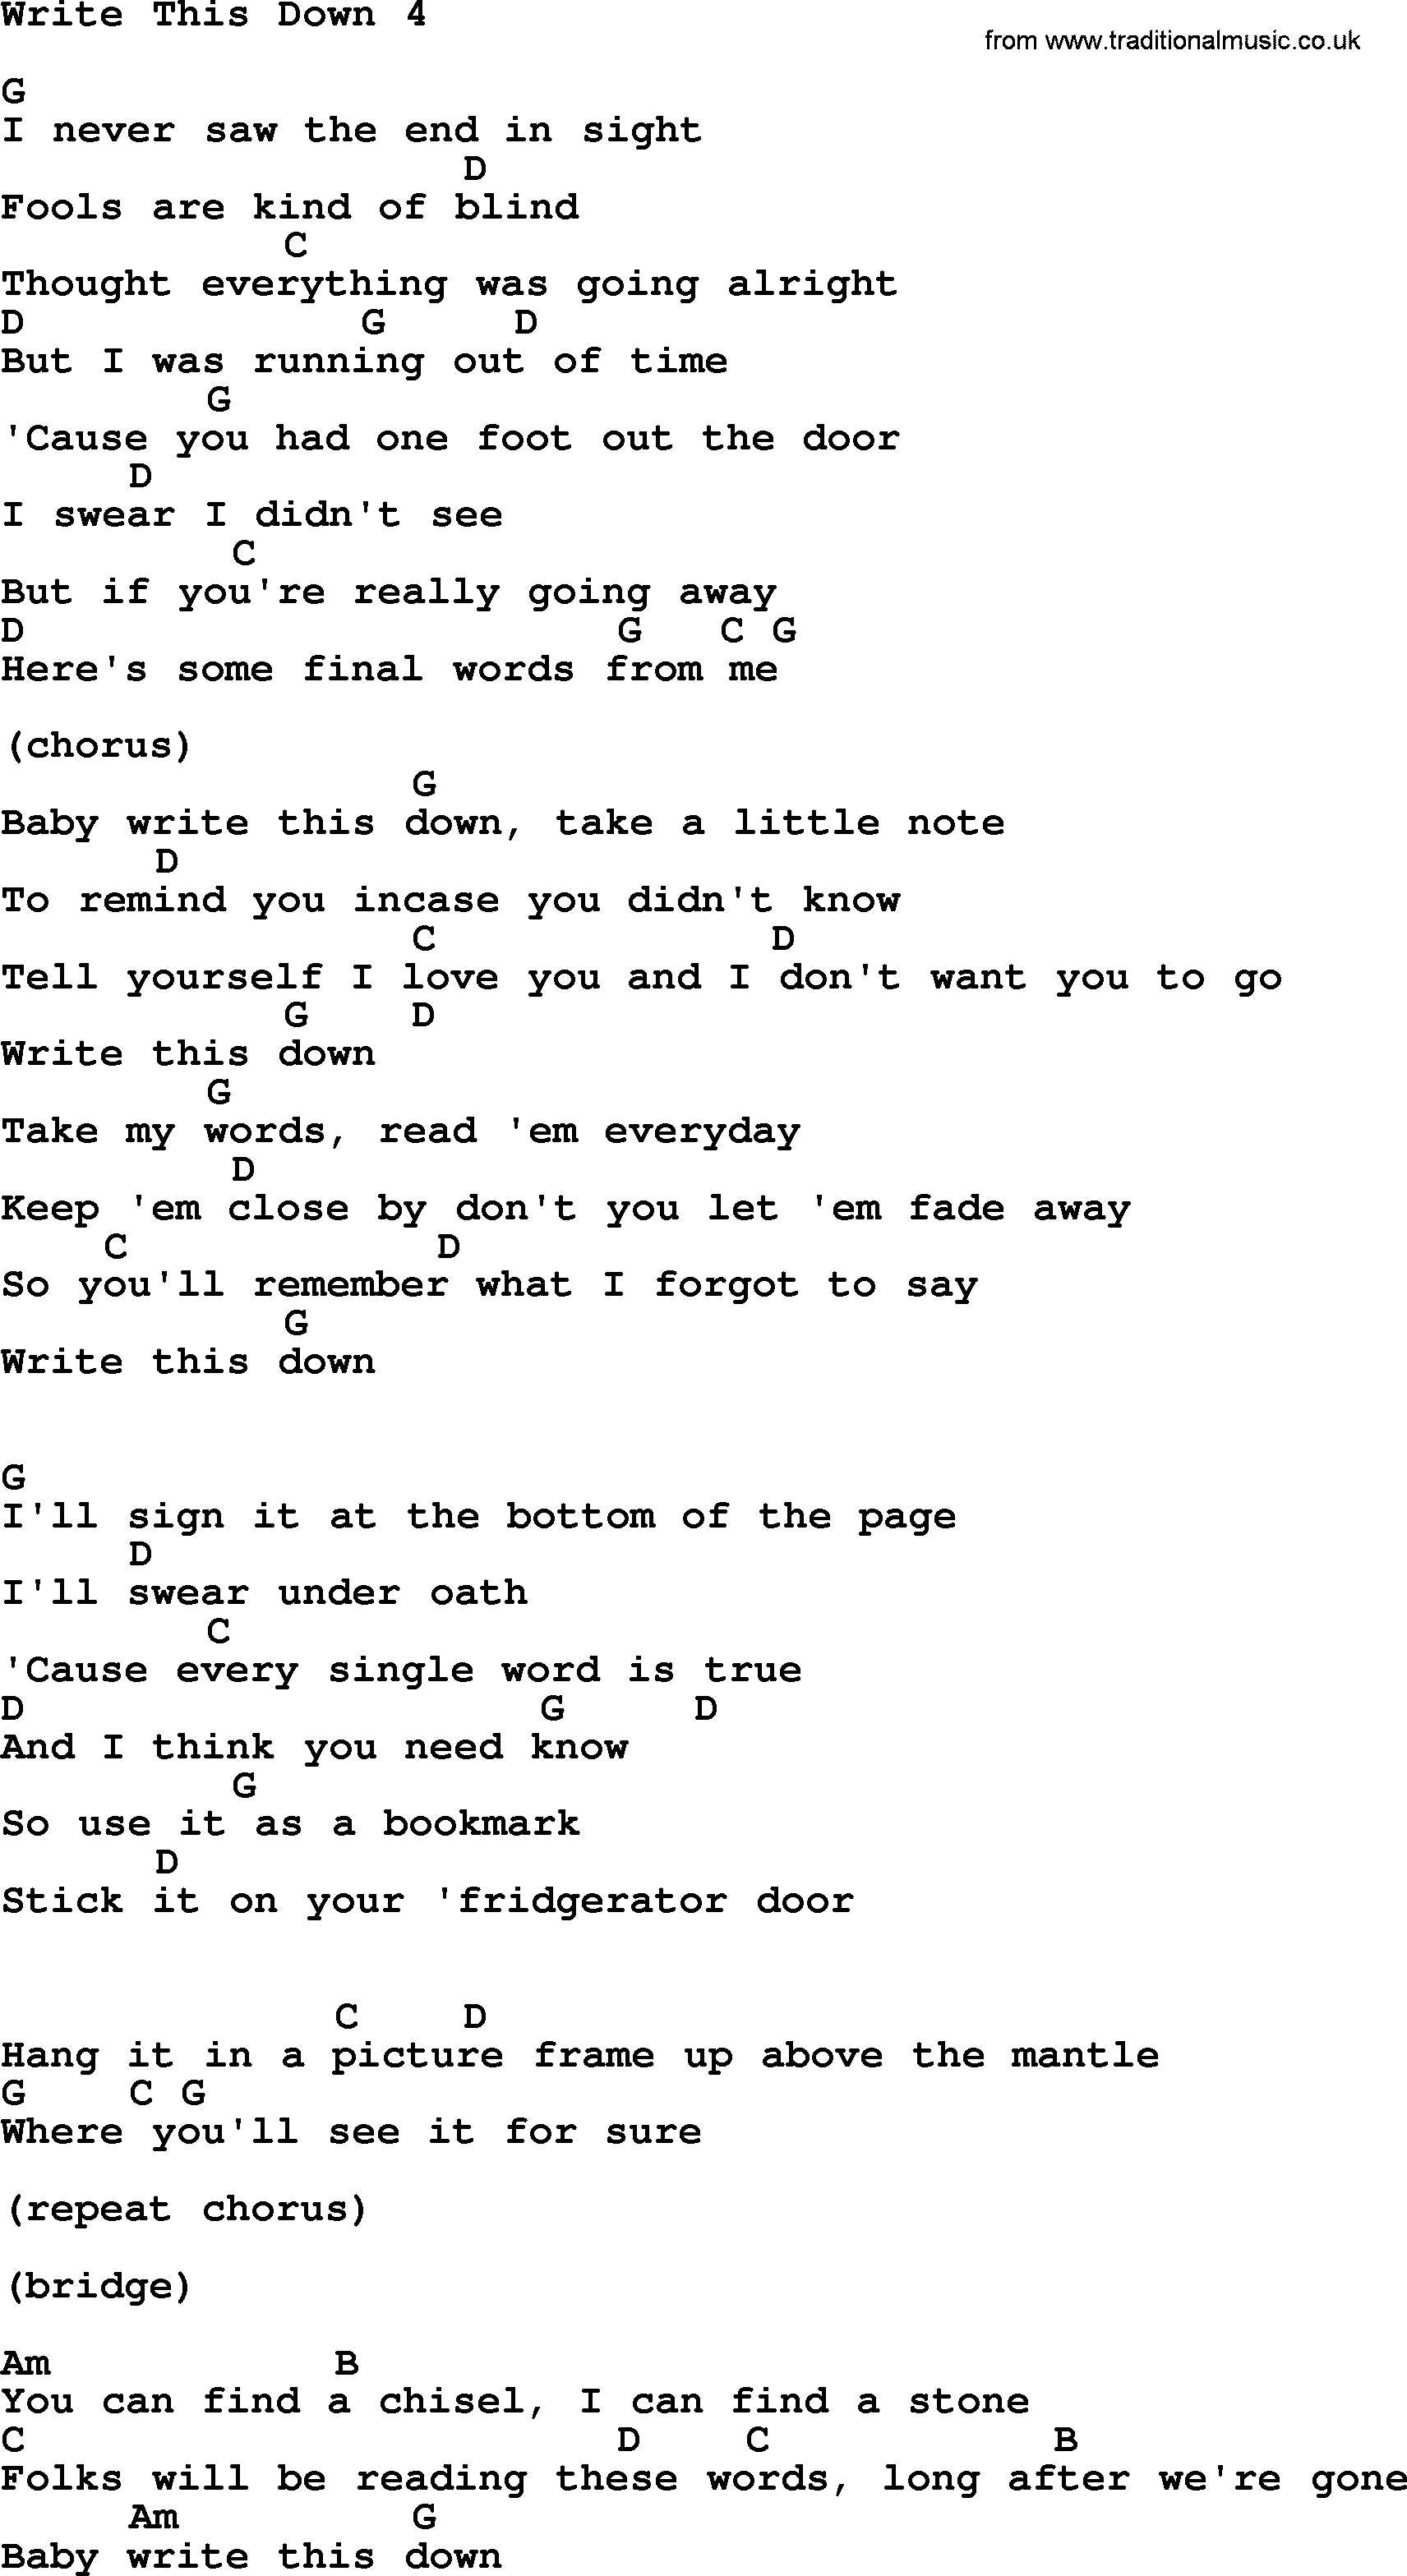 George Strait song: Write This Down 4, lyrics and chords